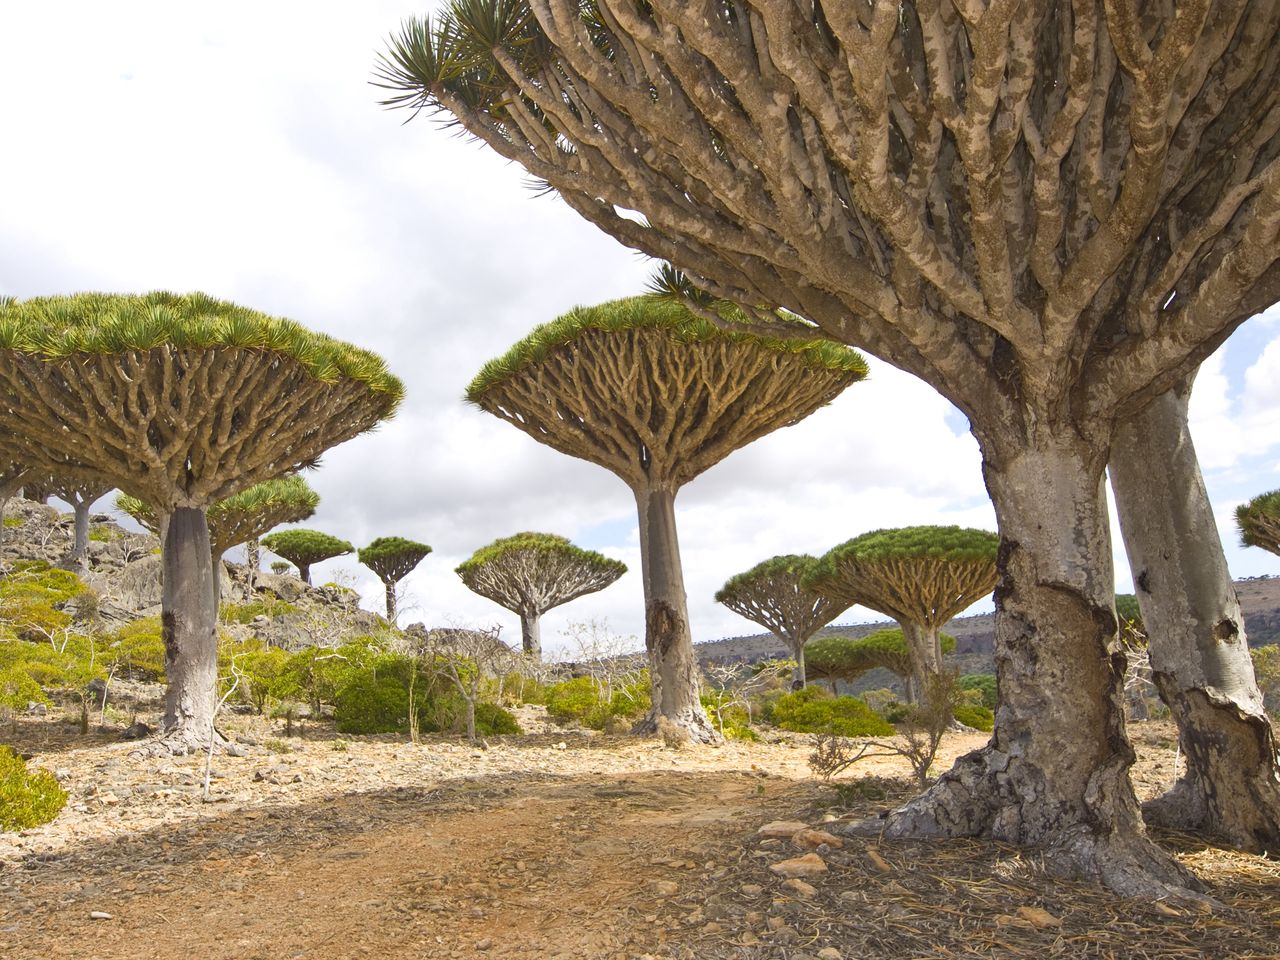 Dragon trees are a symbol of Socotra.